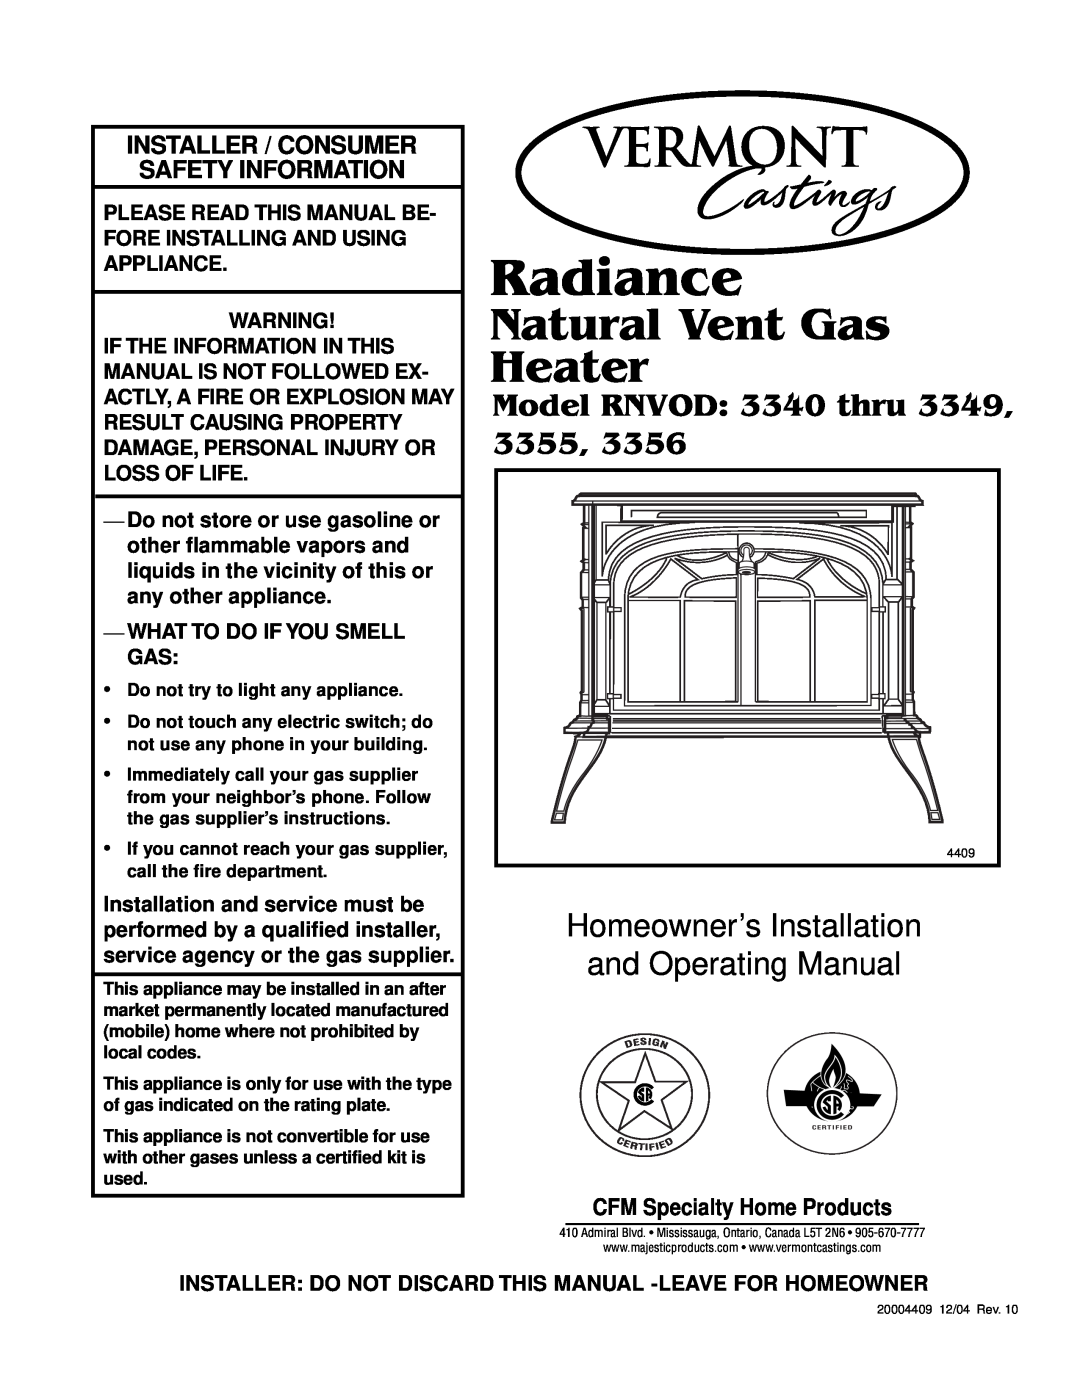 Vermont Casting 3349 manual CFM Specialty Home Products, Radiance, Natural Vent Gas Heater, Model RNVOD 3340 thru, 3355 